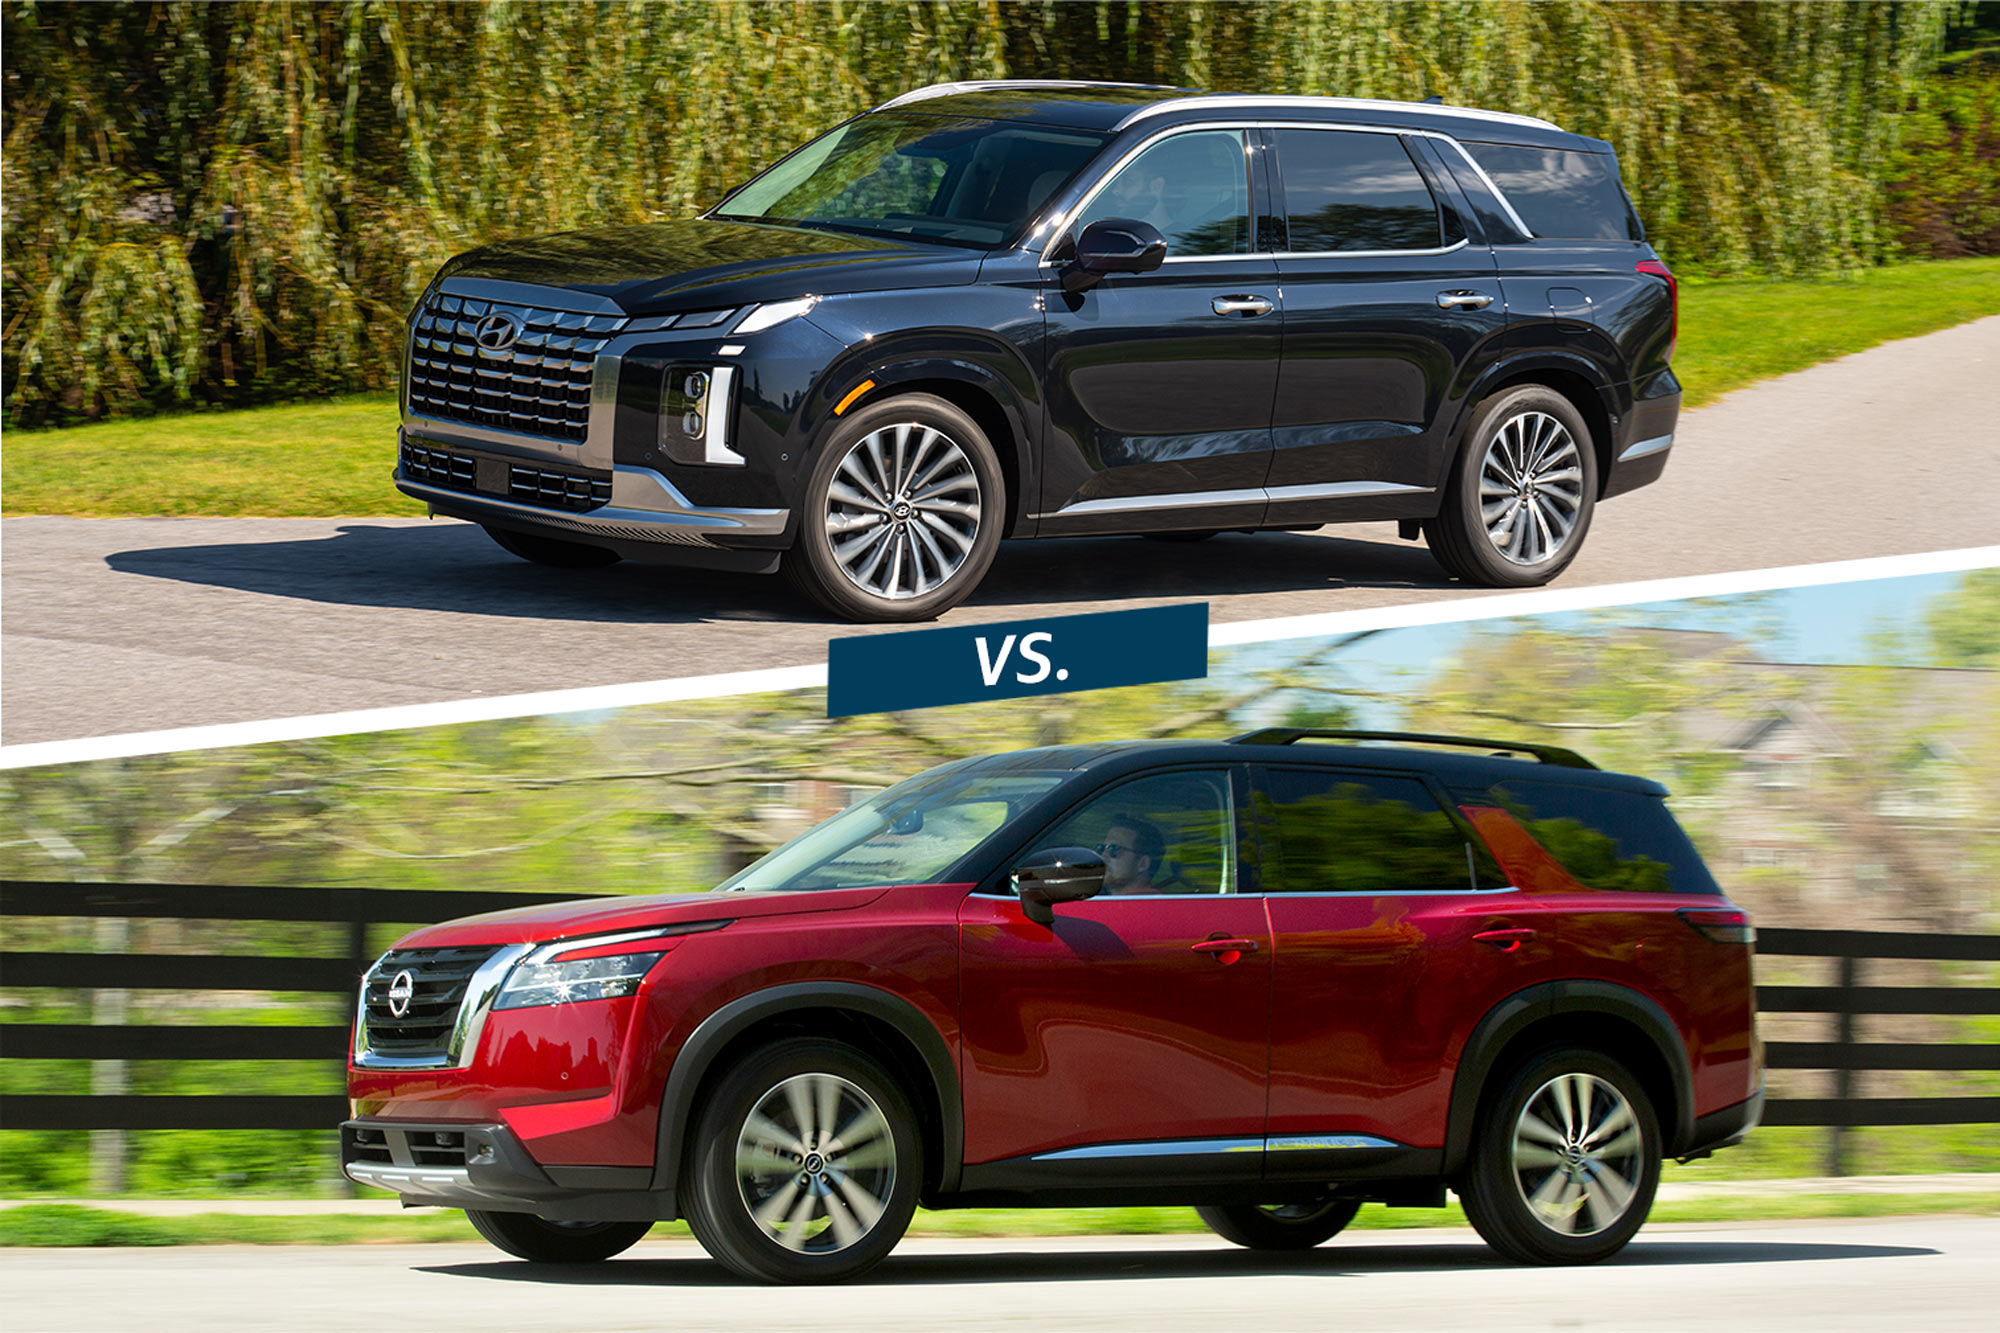 Blue 2023 Hyundai Palisade and red 2023 Nissan Pathfinder compared